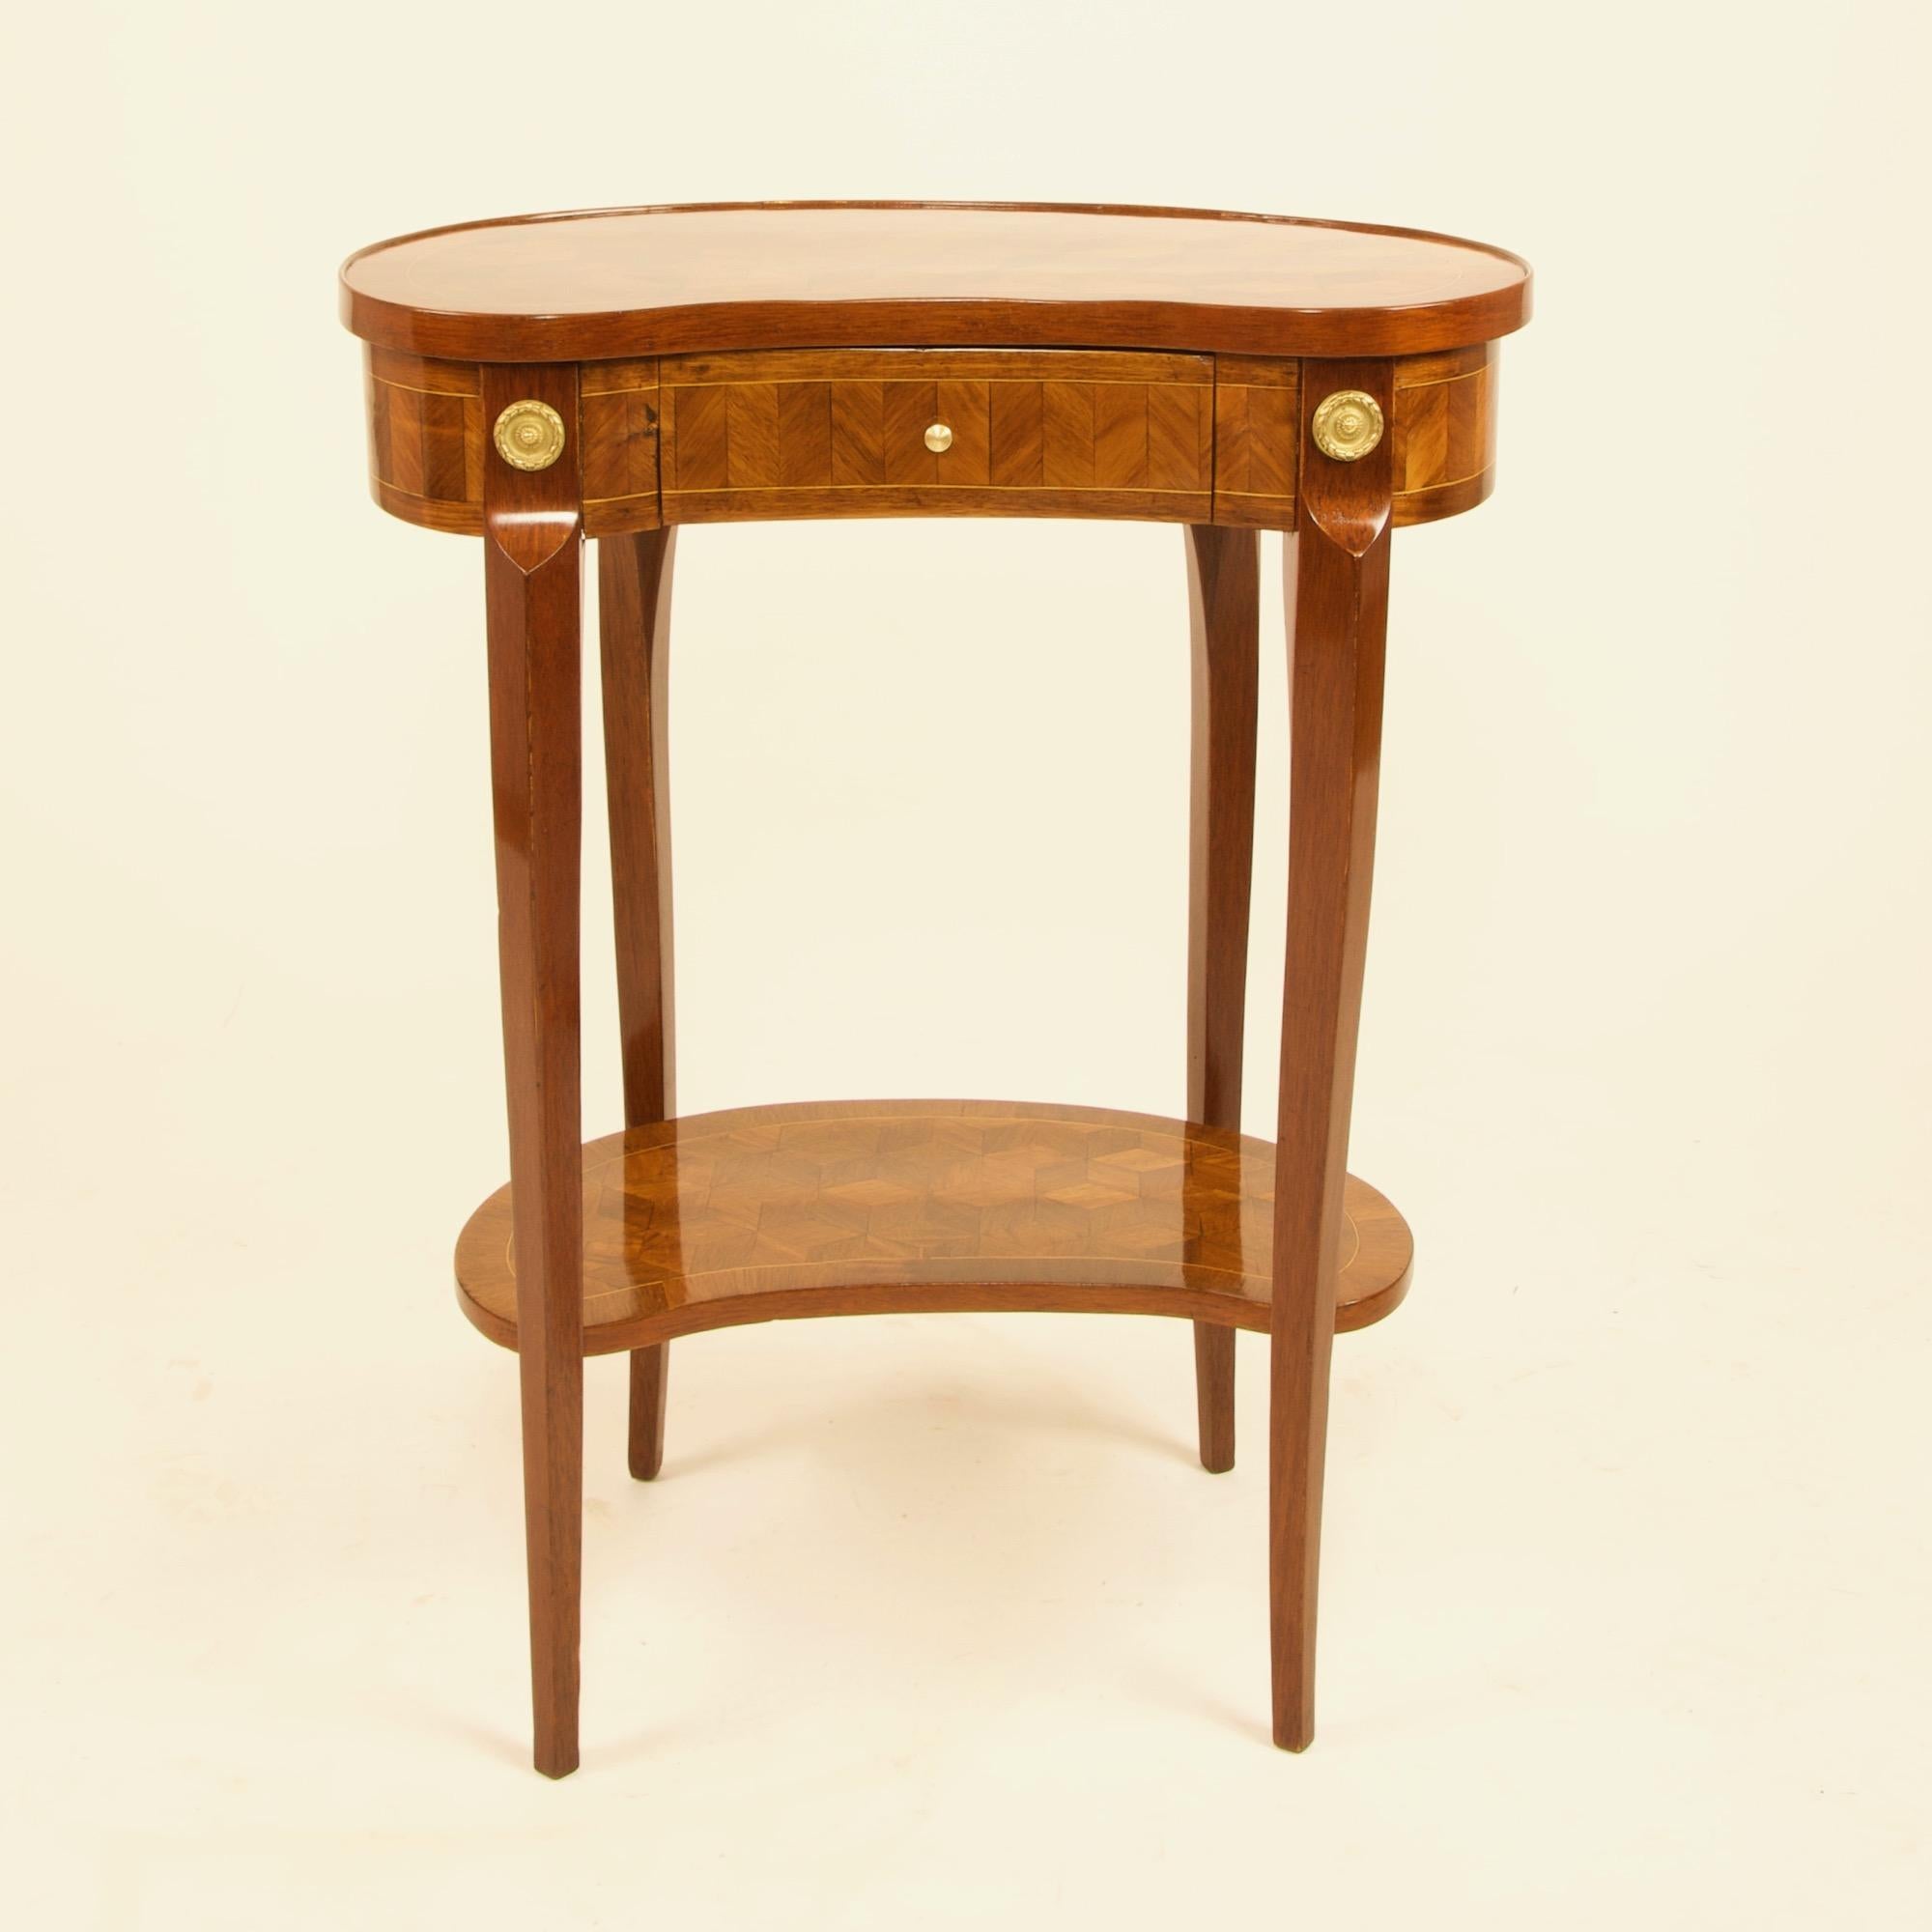 18th Century French Louis XV/Transition period cube marquetry side table, so-called 